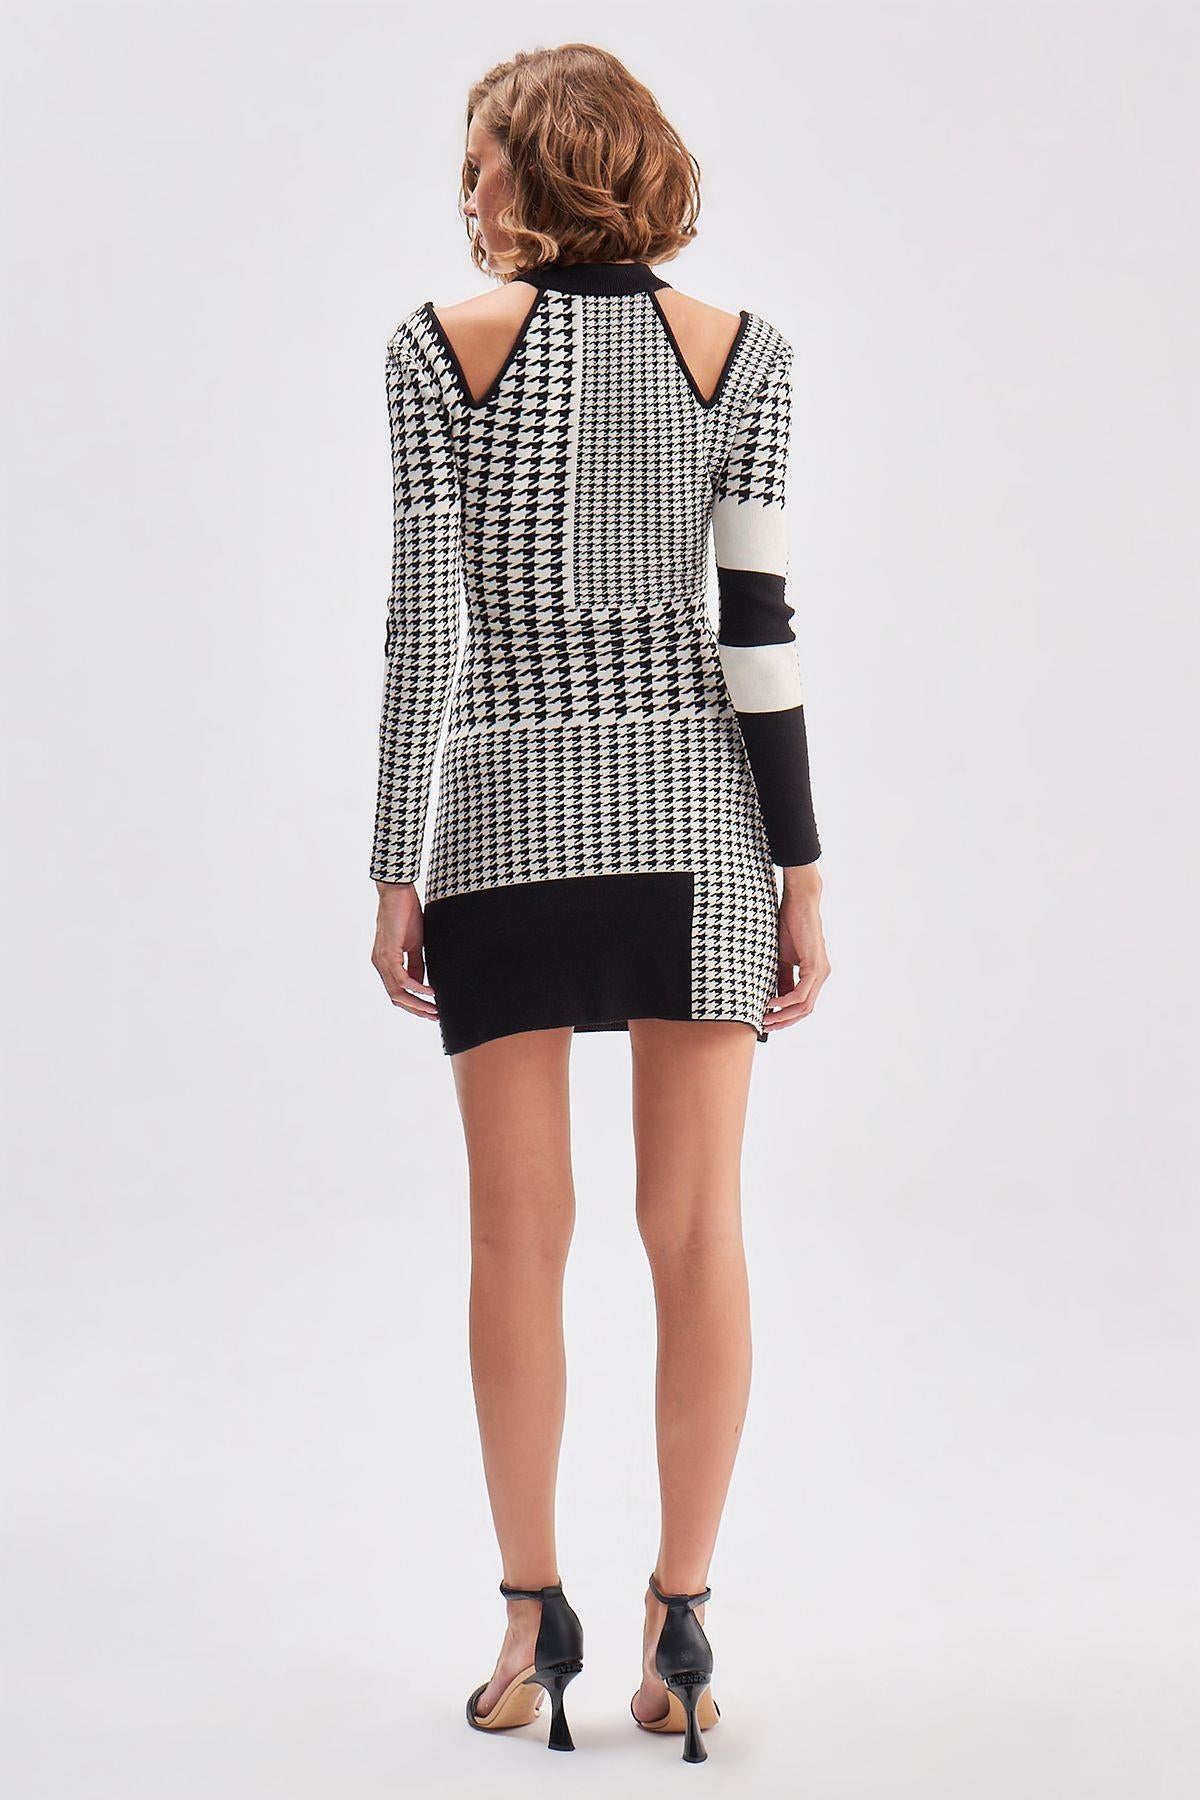 Black and White Patterned Cut Out Knitwear Dress